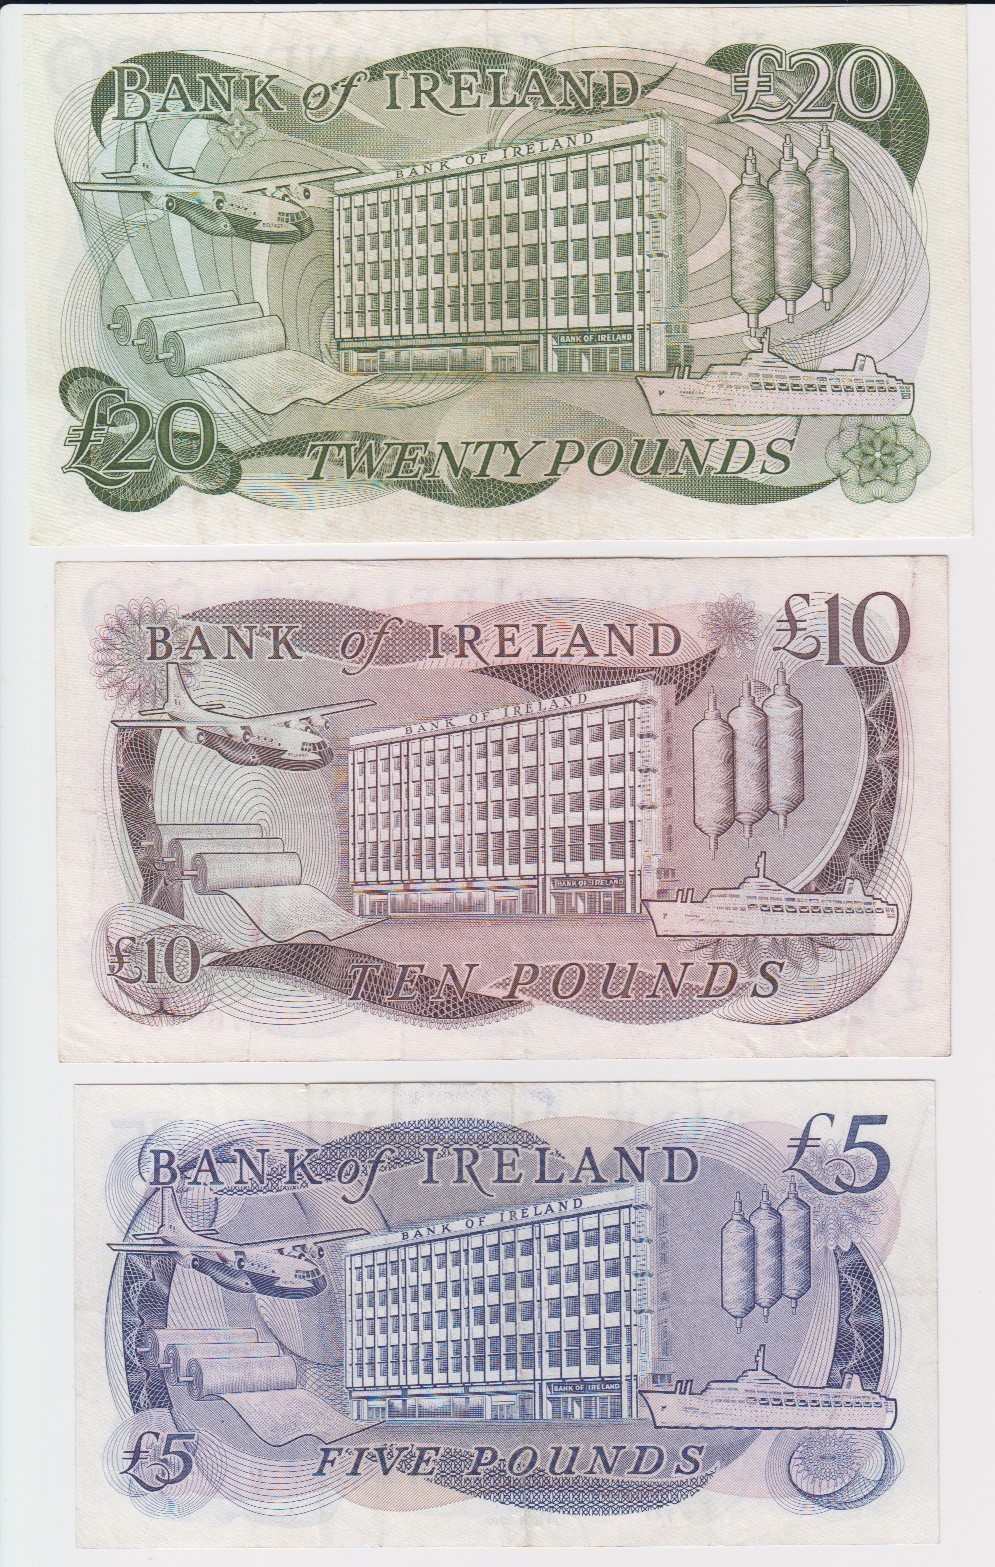 Northern Ireland, Bank of Ireland (3) 20 Pounds, 10 Pounds and 5 Pounds issued 1985, signed D.J. - Image 2 of 2